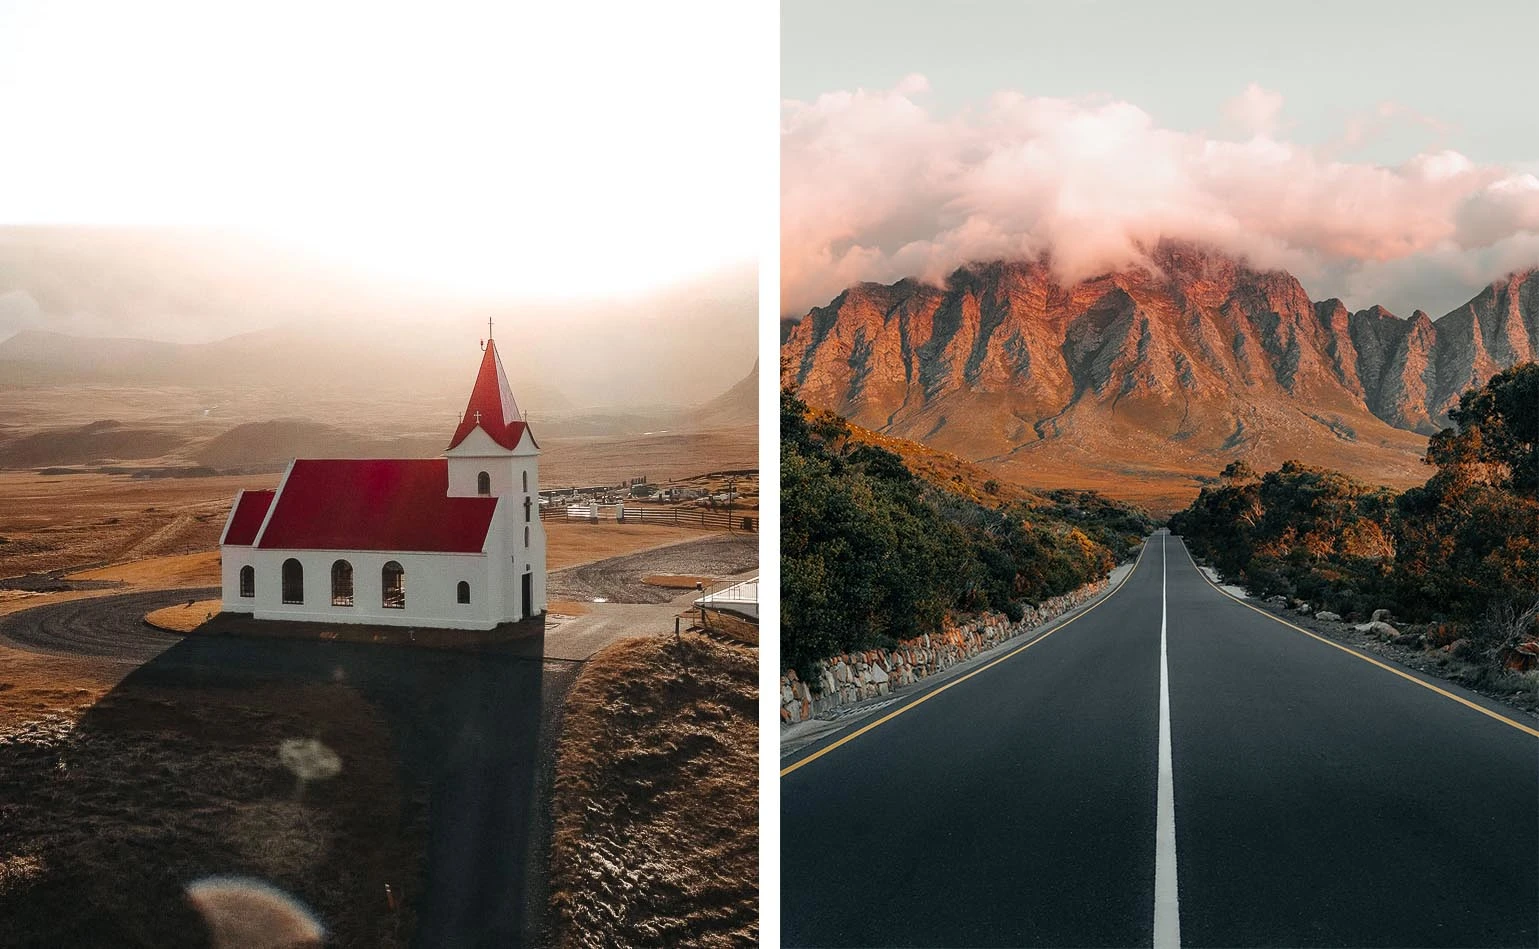 Aerial view of a church (left) and a road with mountains in the background - Photos: piaeliza.